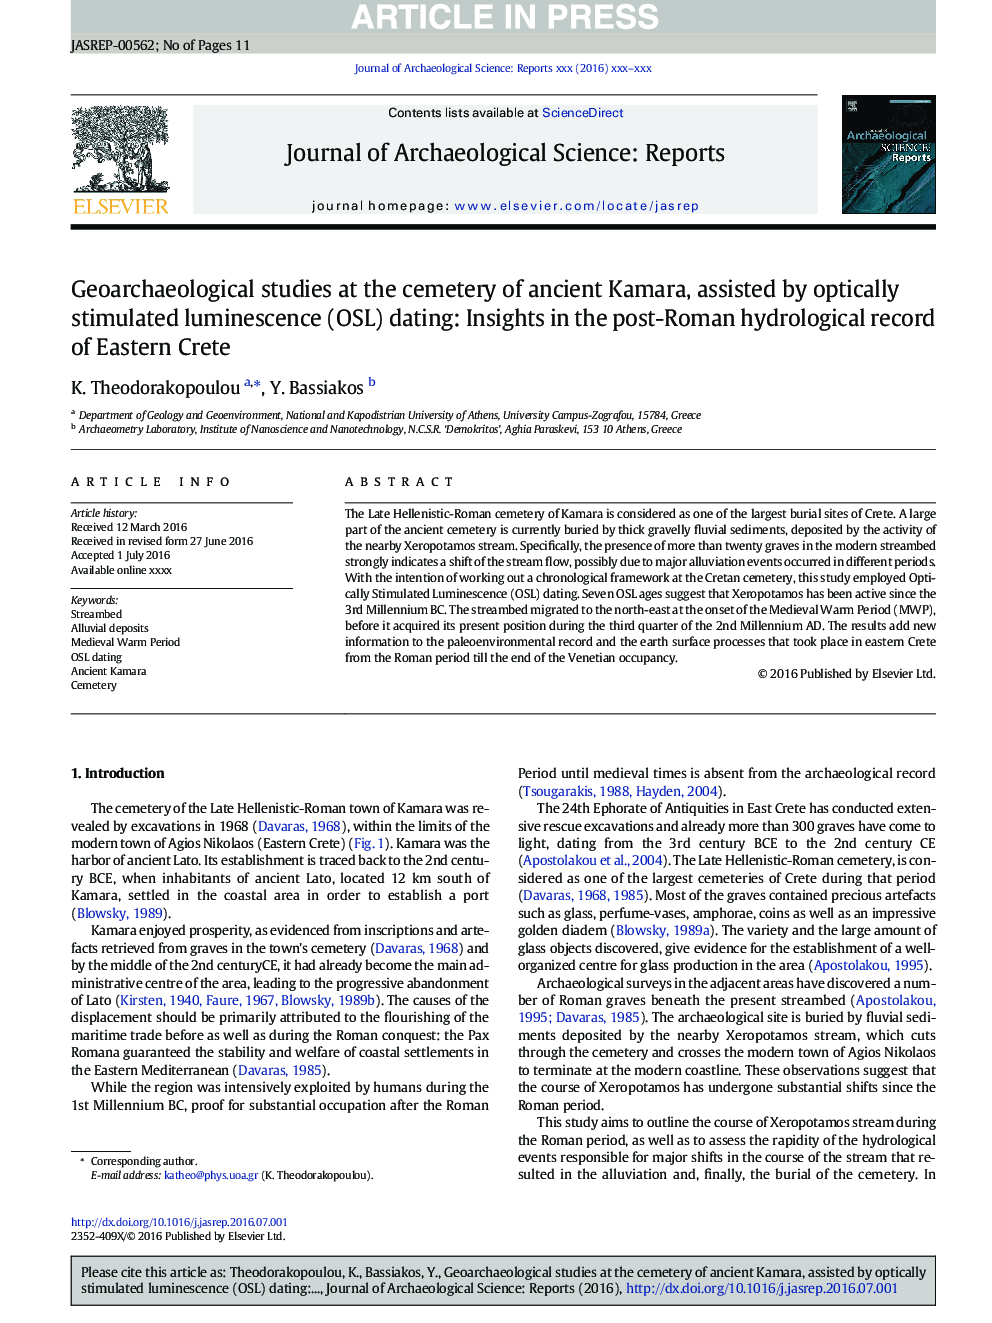 Geoarchaeological studies at the cemetery of ancient Kamara, assisted by optically stimulated luminescence (OSL) dating: Insights in the post-Roman hydrological record of Eastern Crete